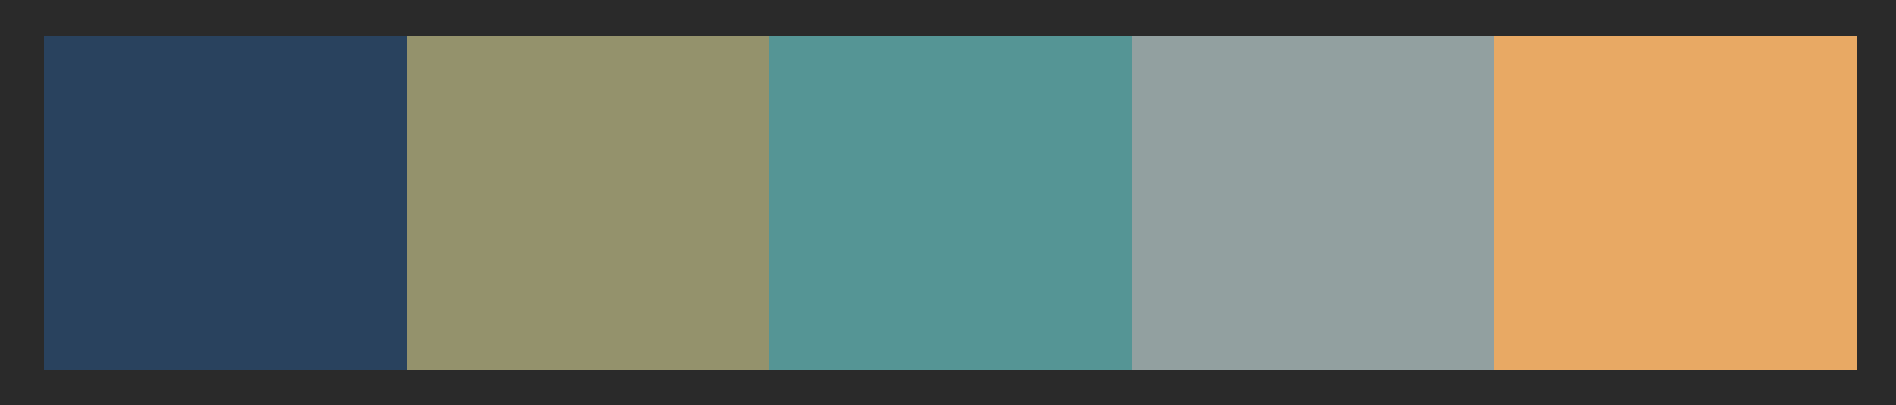 How to Make a Colour Palette